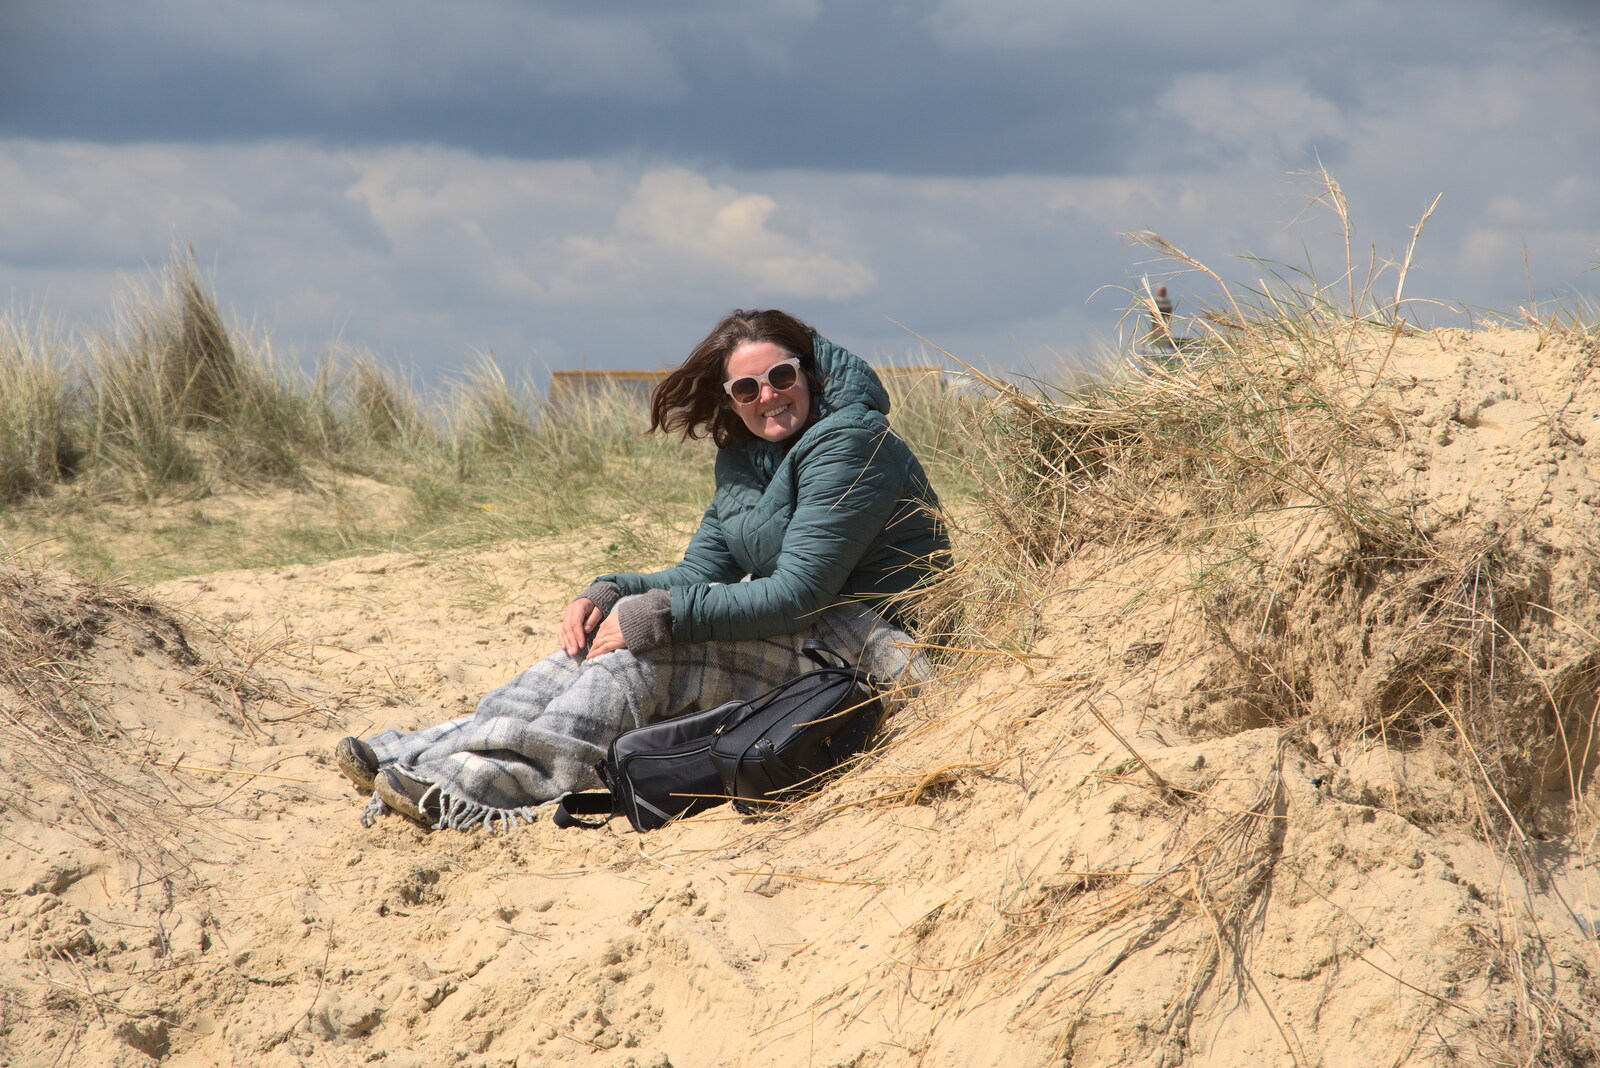 Isobel's up in the dunes from A Chilly Trip to the Beach, Southwold Harbour, Suffolk - 2nd May 2021